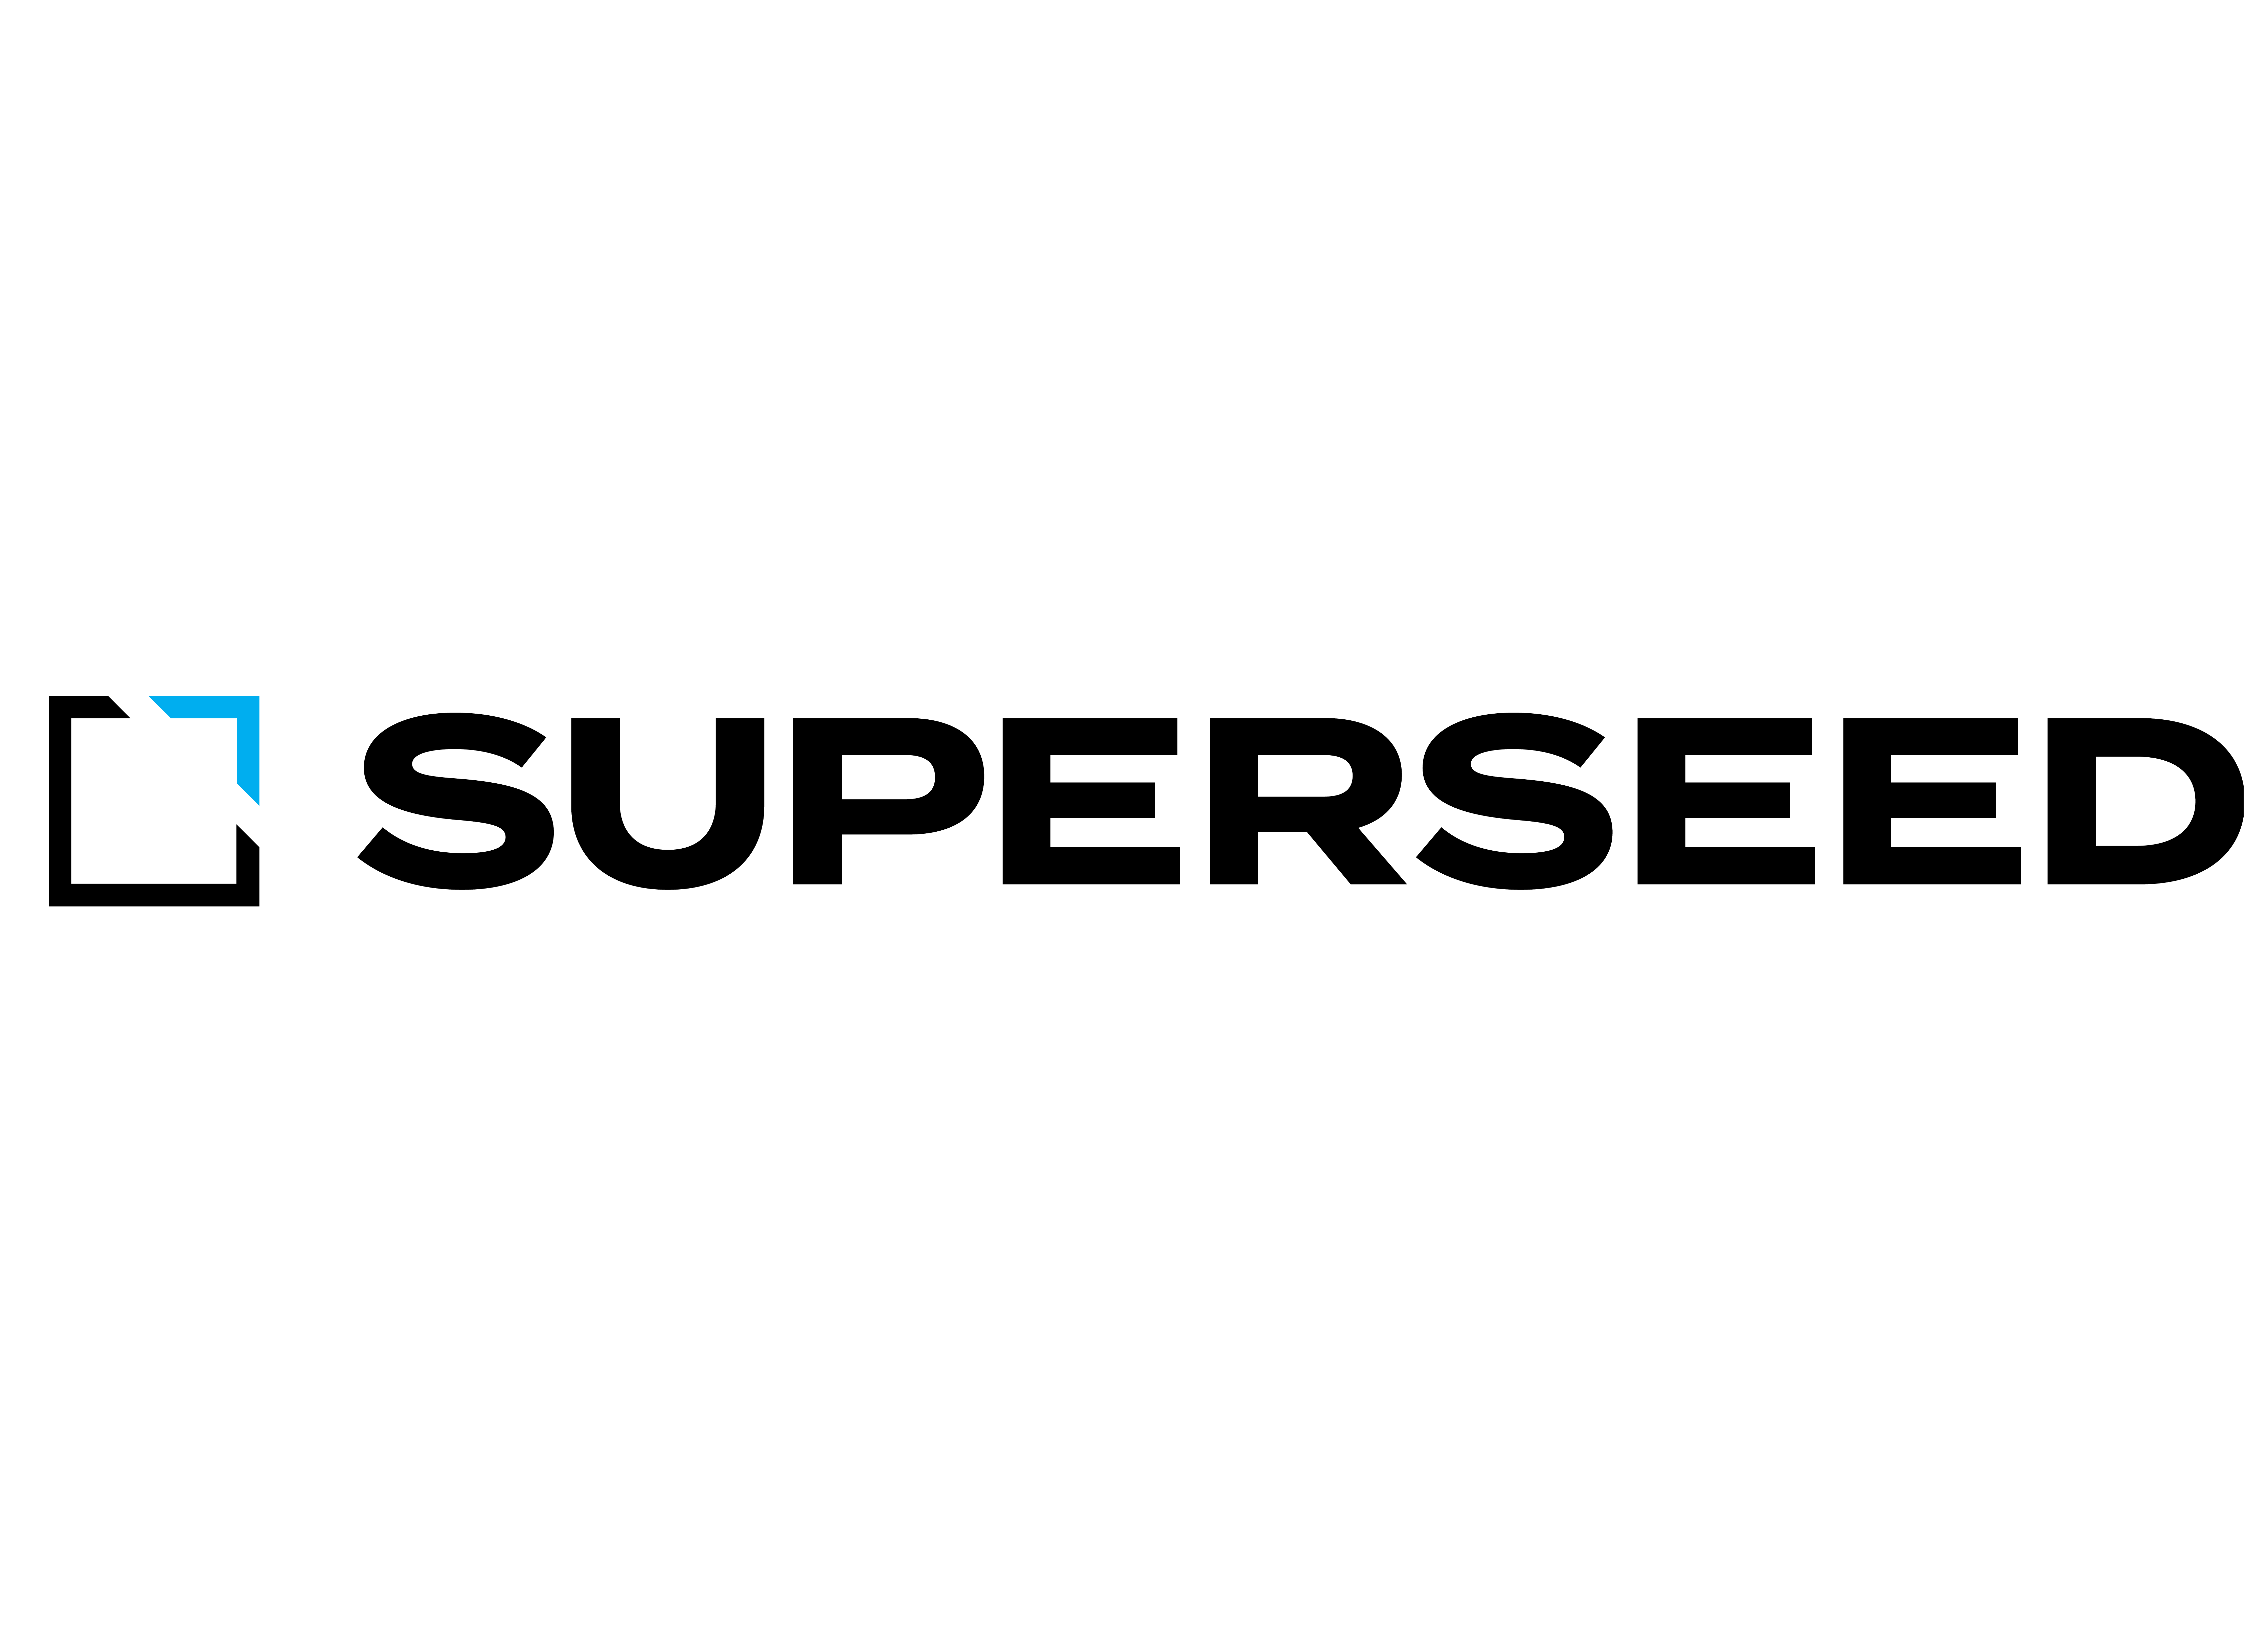 Superseed logo